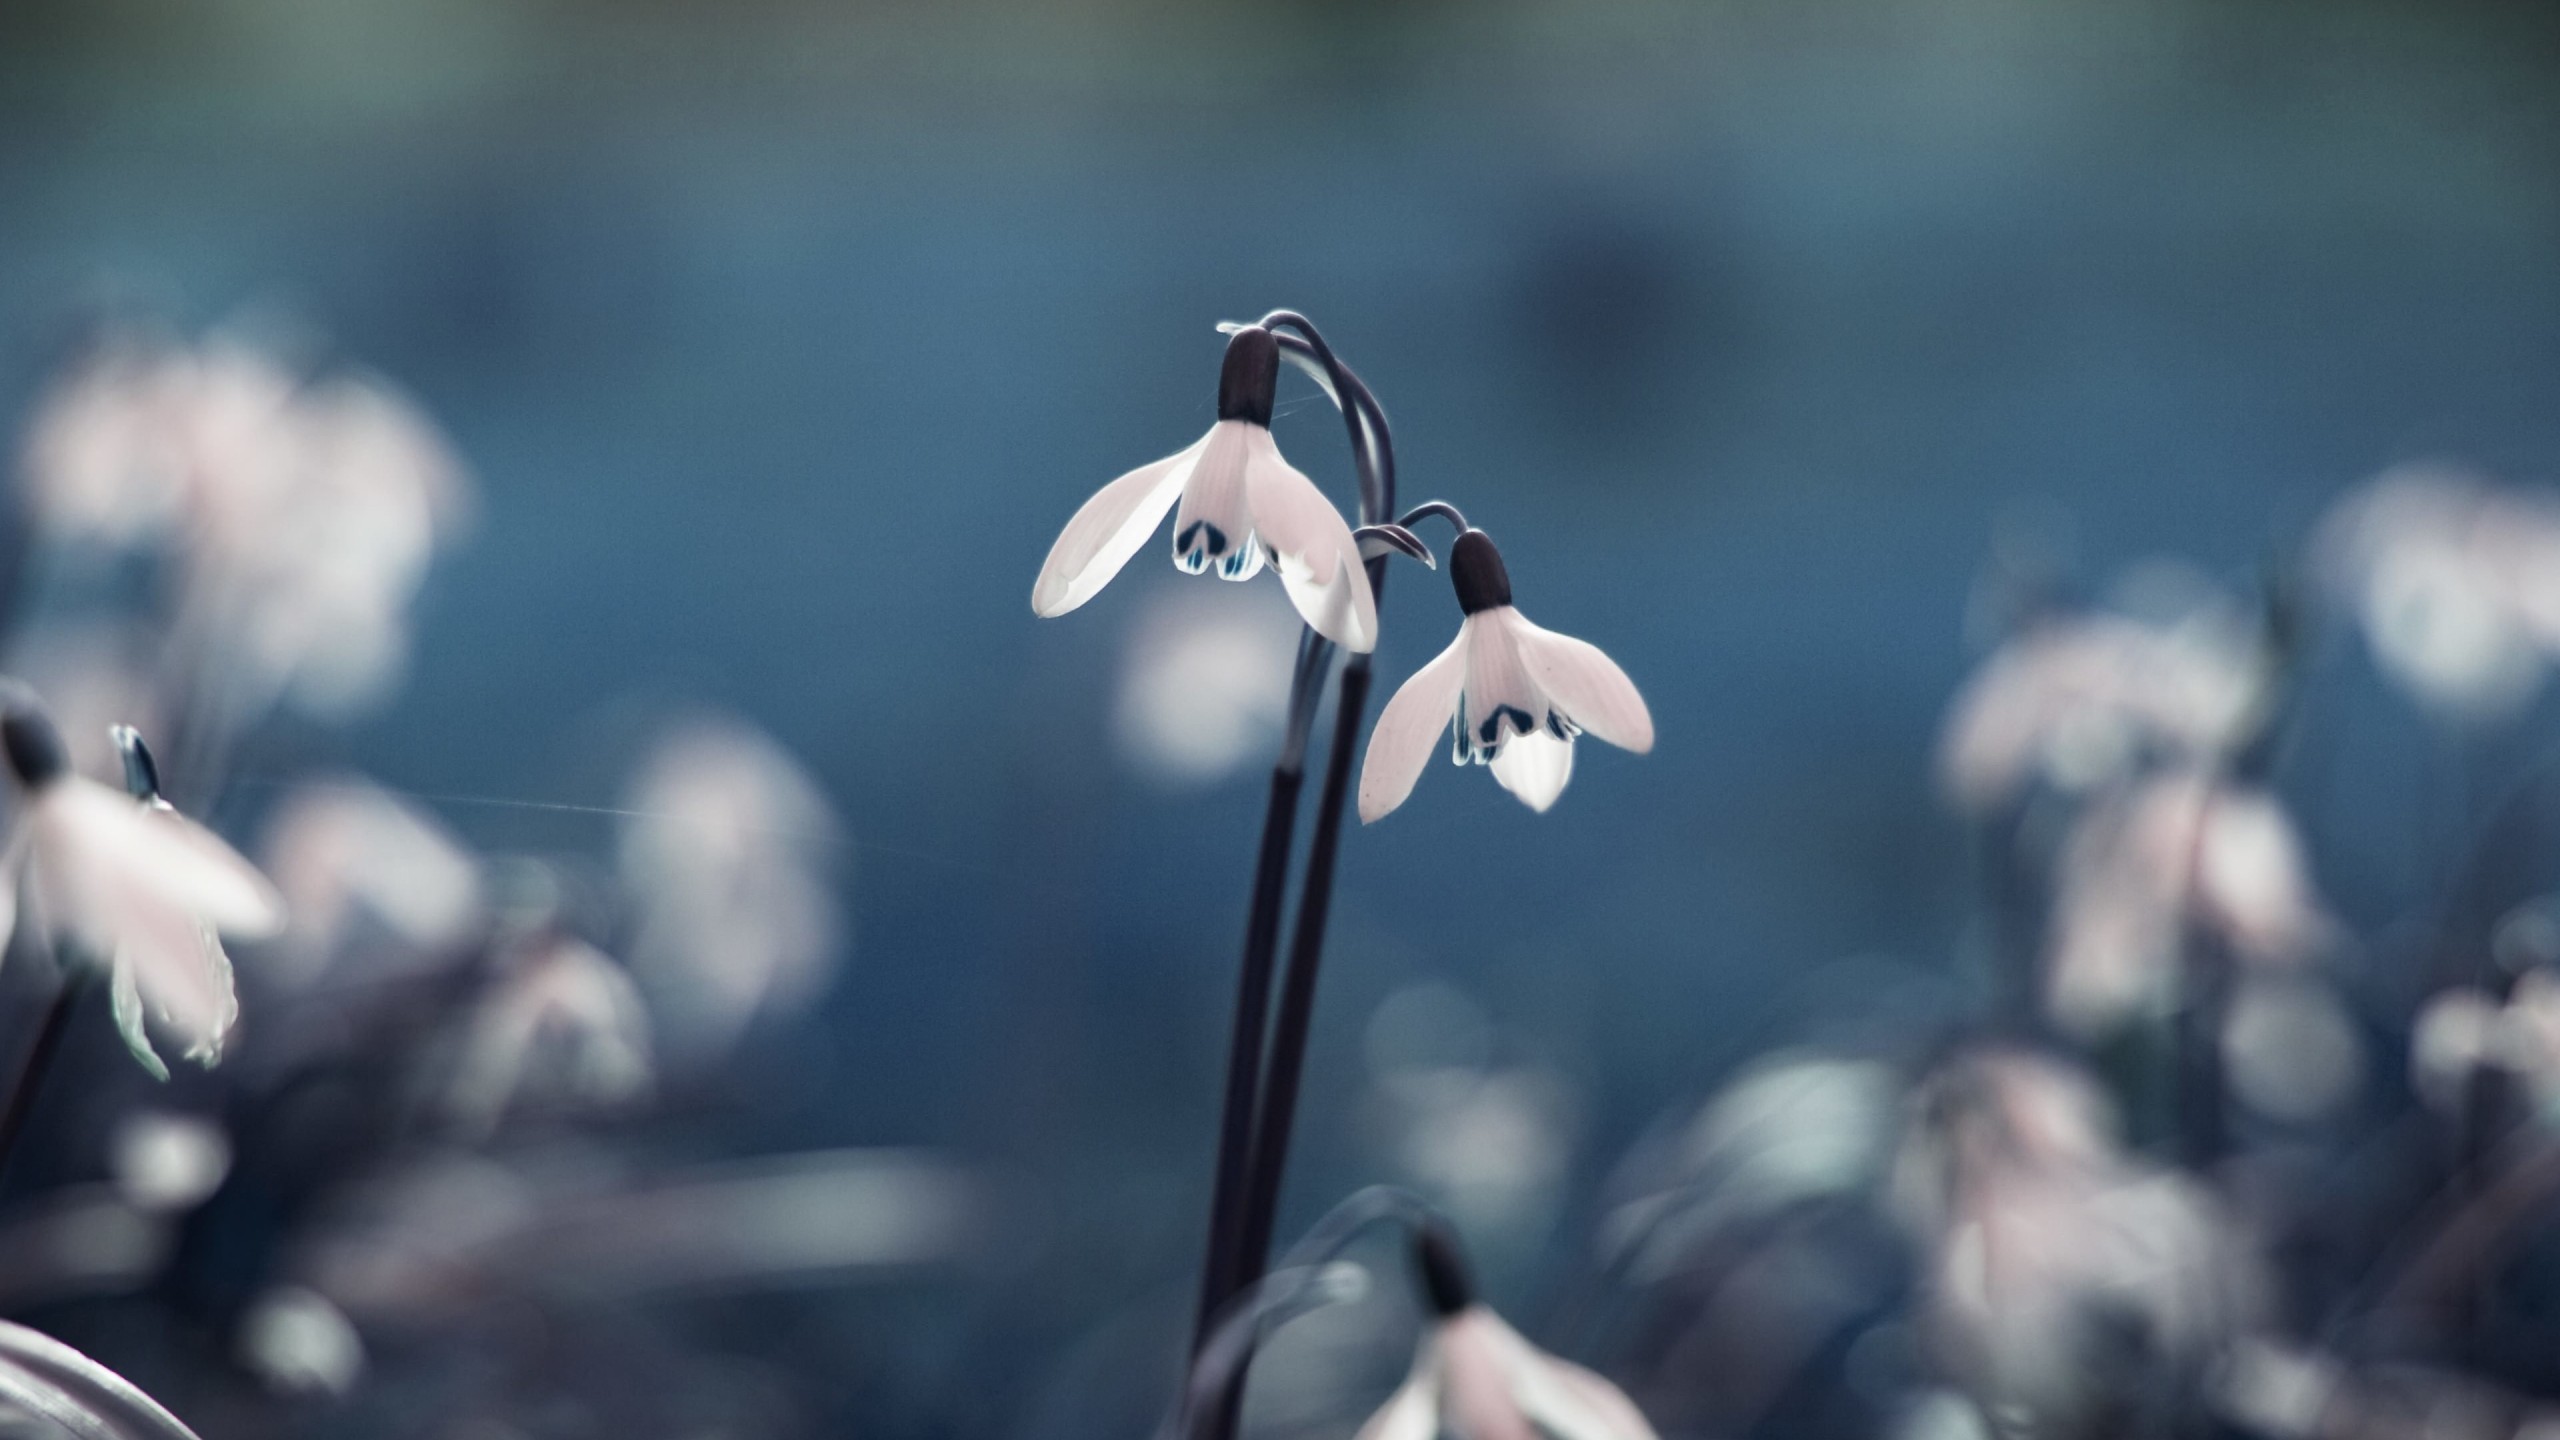 Snowdrop "Galanthus" Wallpaper for Social Media YouTube Channel Art